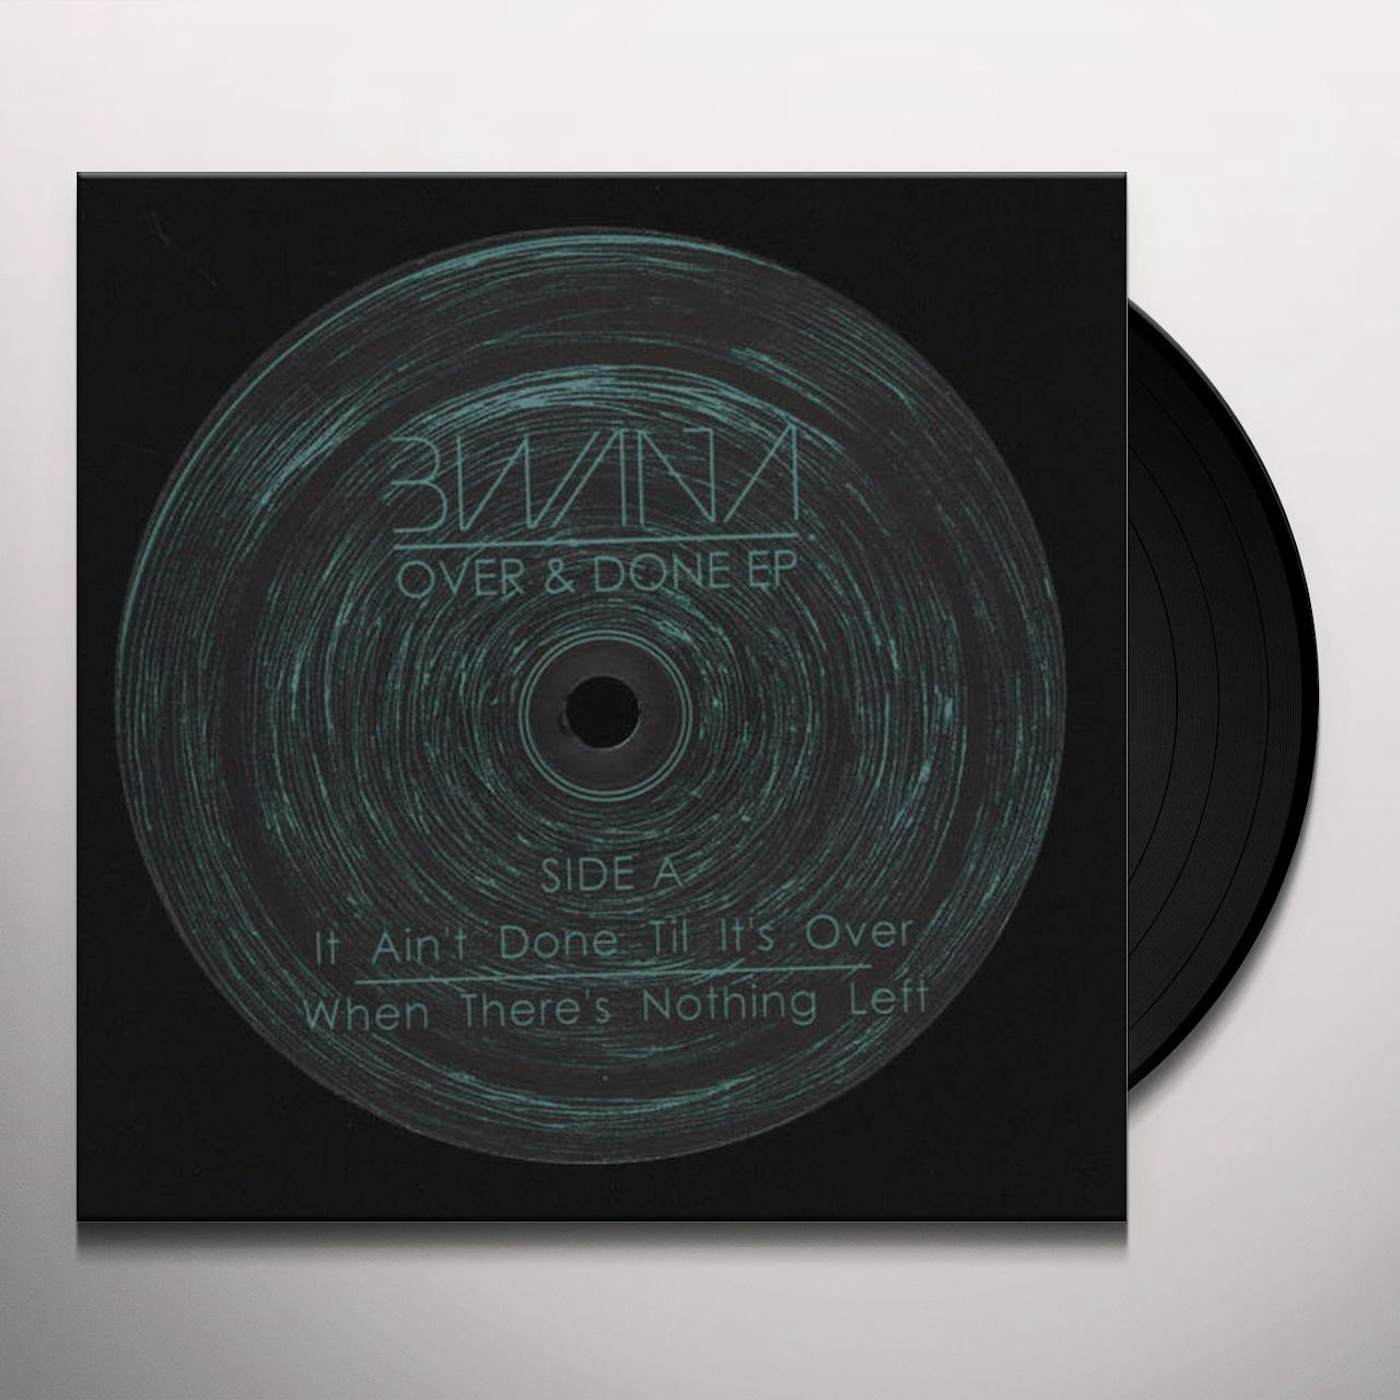 Bwana OVER & DONE Vinyl Record - UK Release